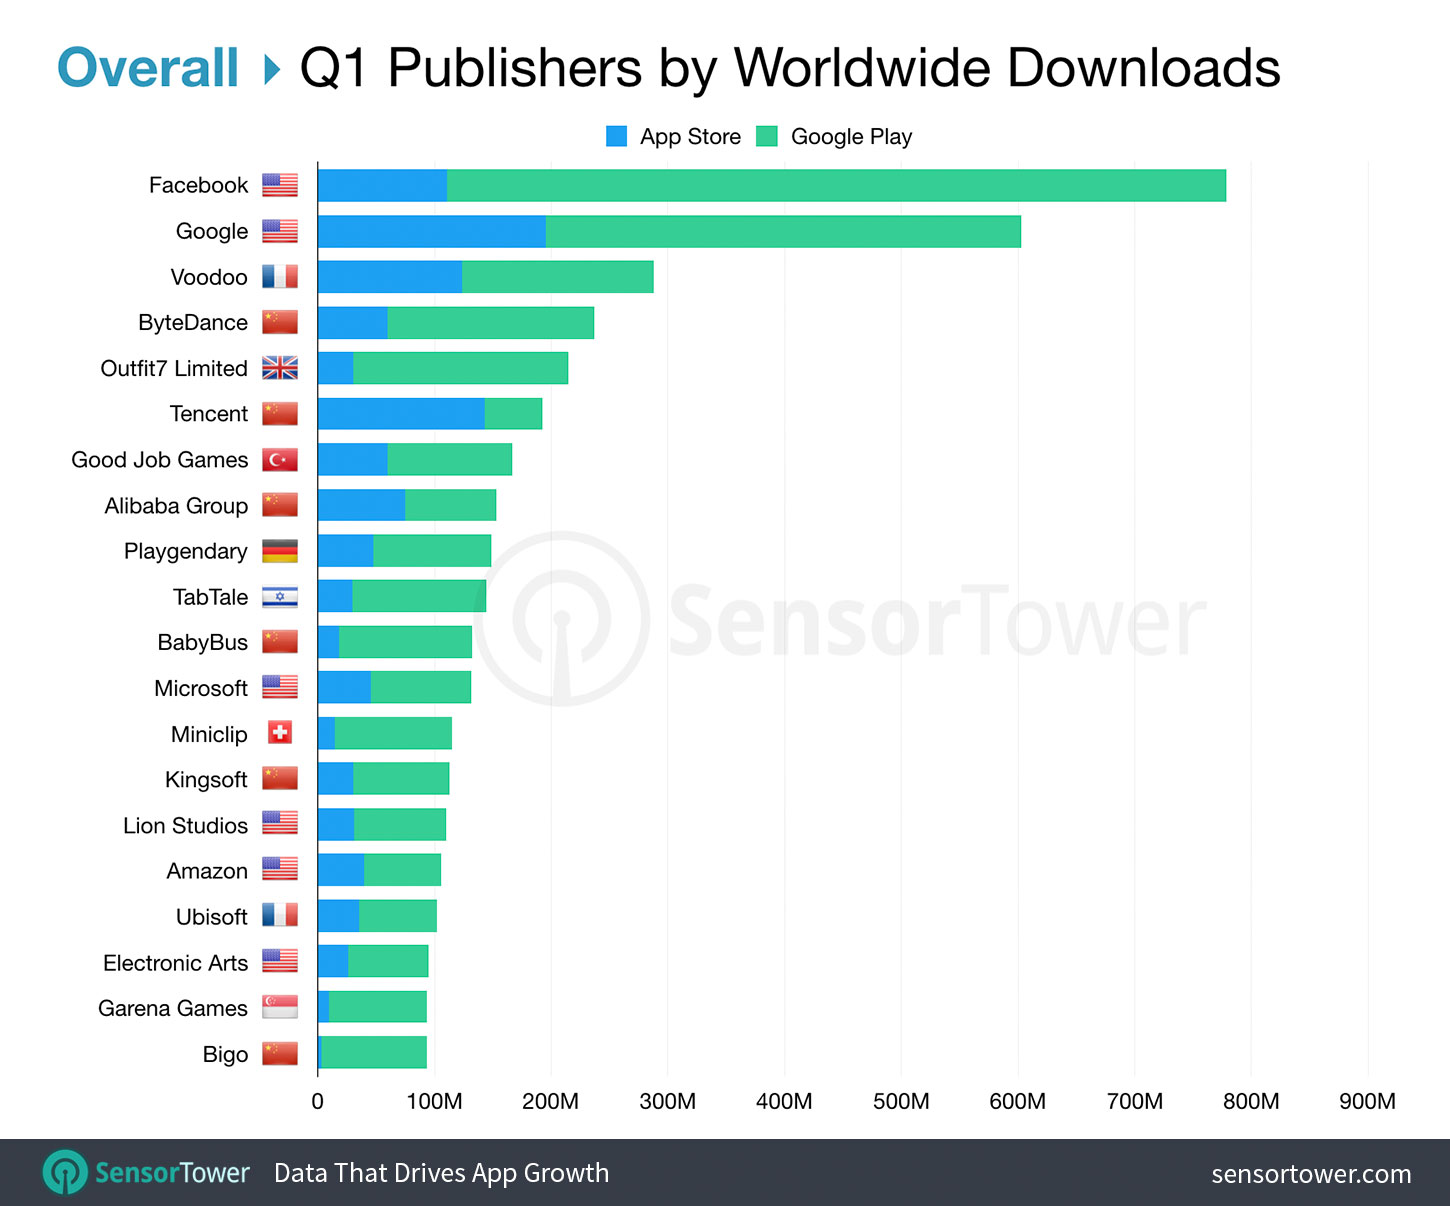 Top Publishers Worldwide Overall for Q1 2019